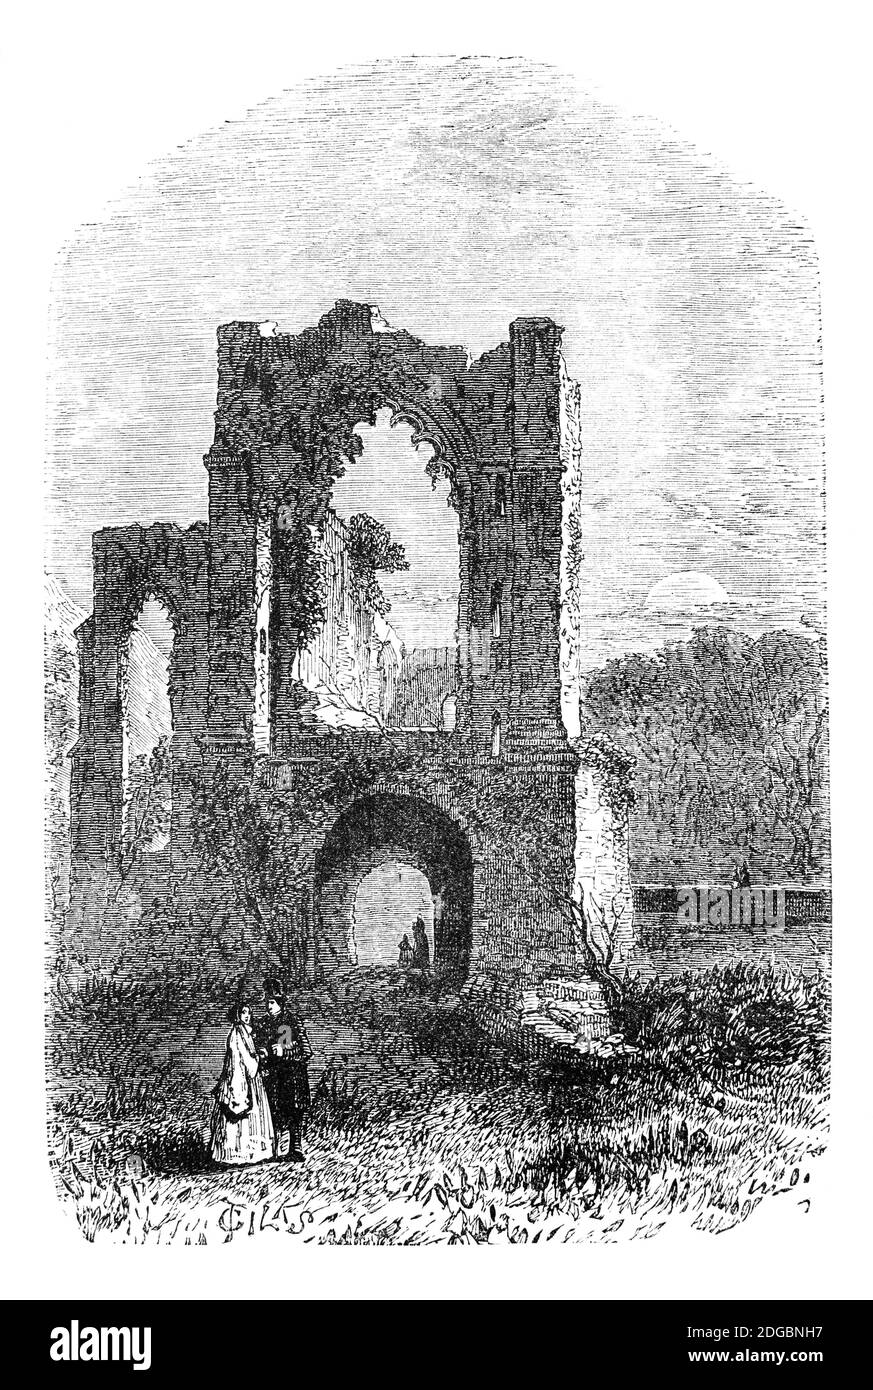 A late 19th century view of ruined Gothic Furness Abbey, near Barrow-in-Furness, Cumbria, England founded in 1123. It became the second-wealthiest and most powerful Cistercian monastery in the country, despite being in what was then a remote border territory where they  found themselves in between the Scots and English. When Robert the Bruce invaded England, during The Great Raid of 1322, the abbot paid to support him, rather than risk losing the wealth and power of the abbey. The Abbey was dis-established and destroyed in 1537 during the English Reformation under the orders of Henry VIII. Stock Photo